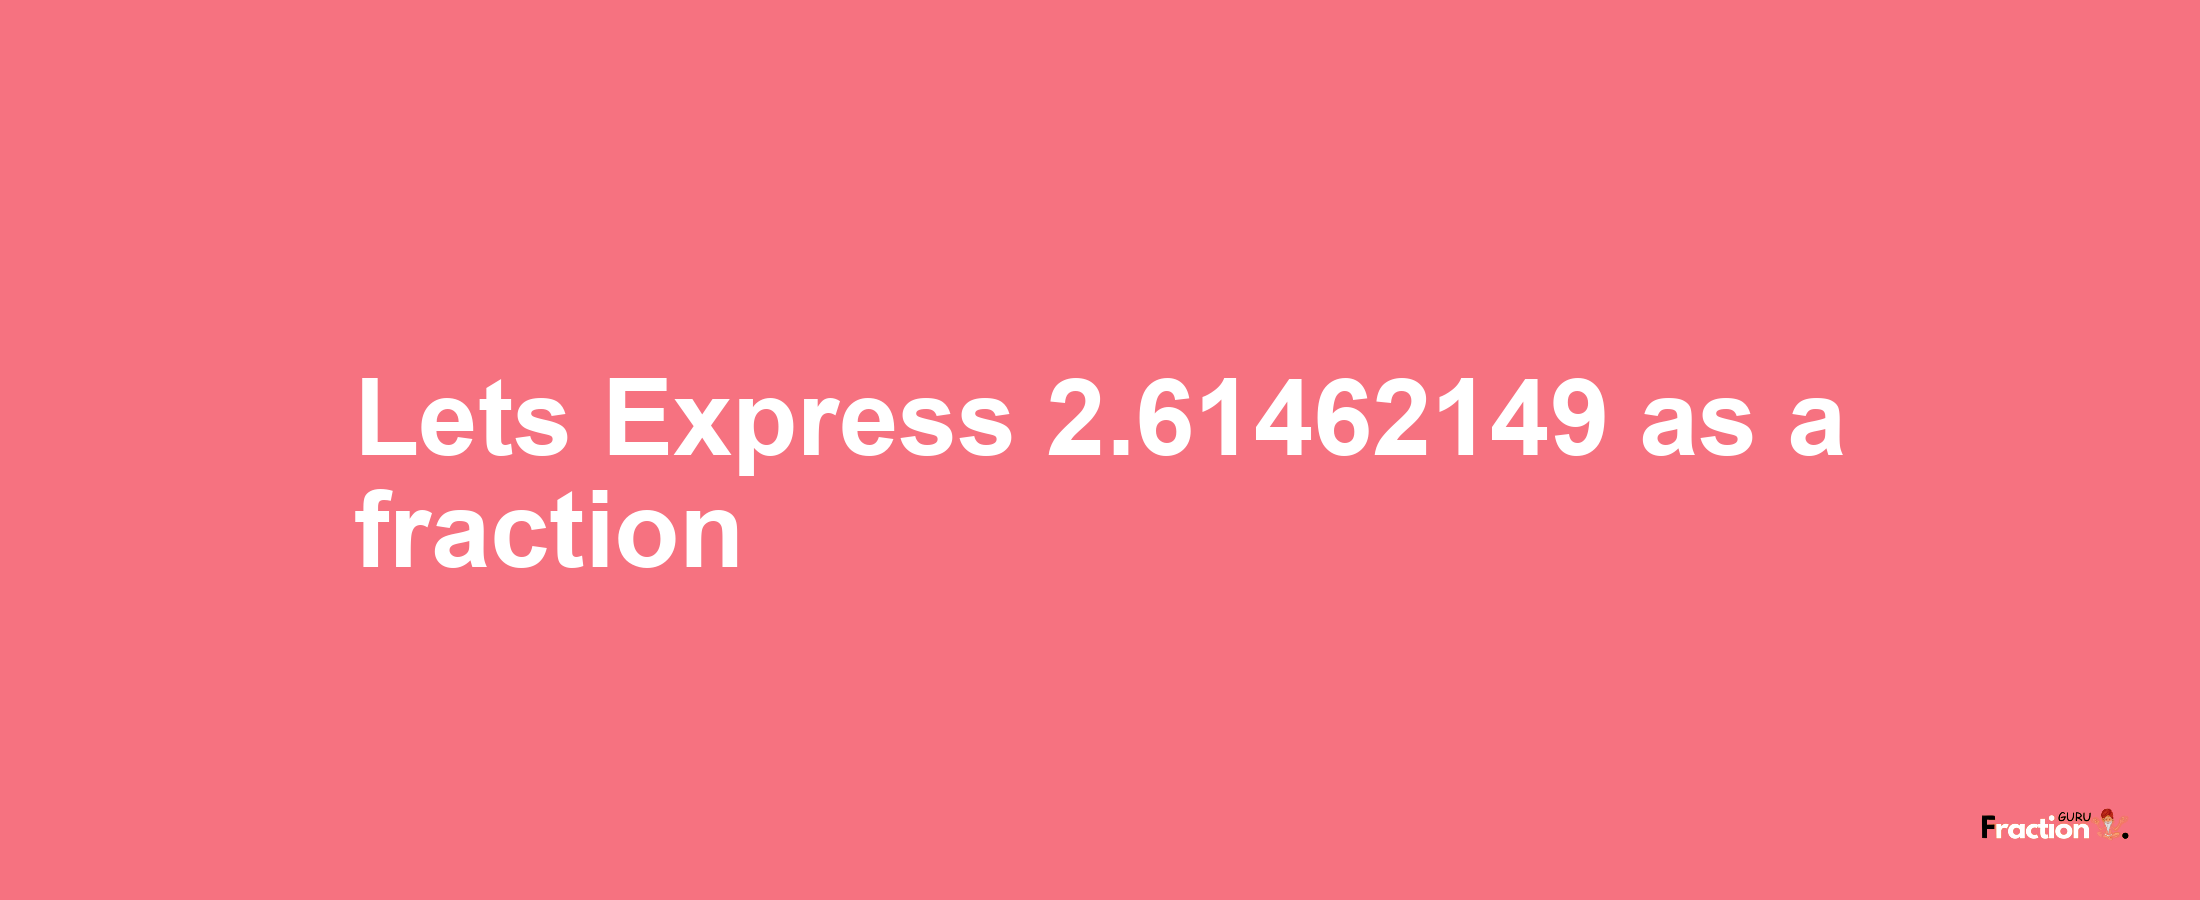 Lets Express 2.61462149 as afraction